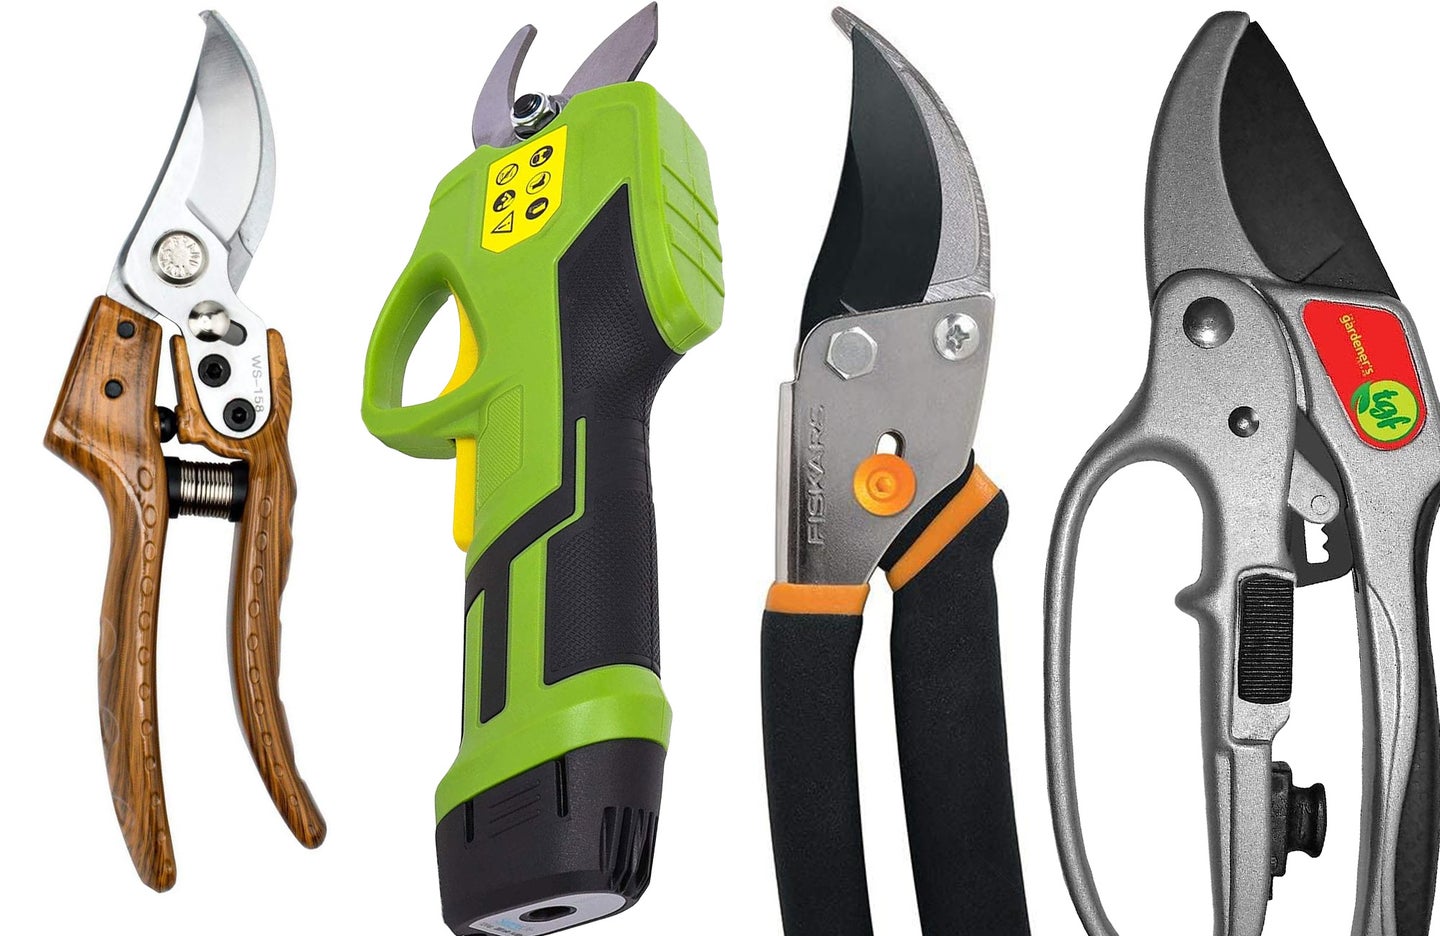 The best pruning shears will make yard work and gardening quicker and easier.